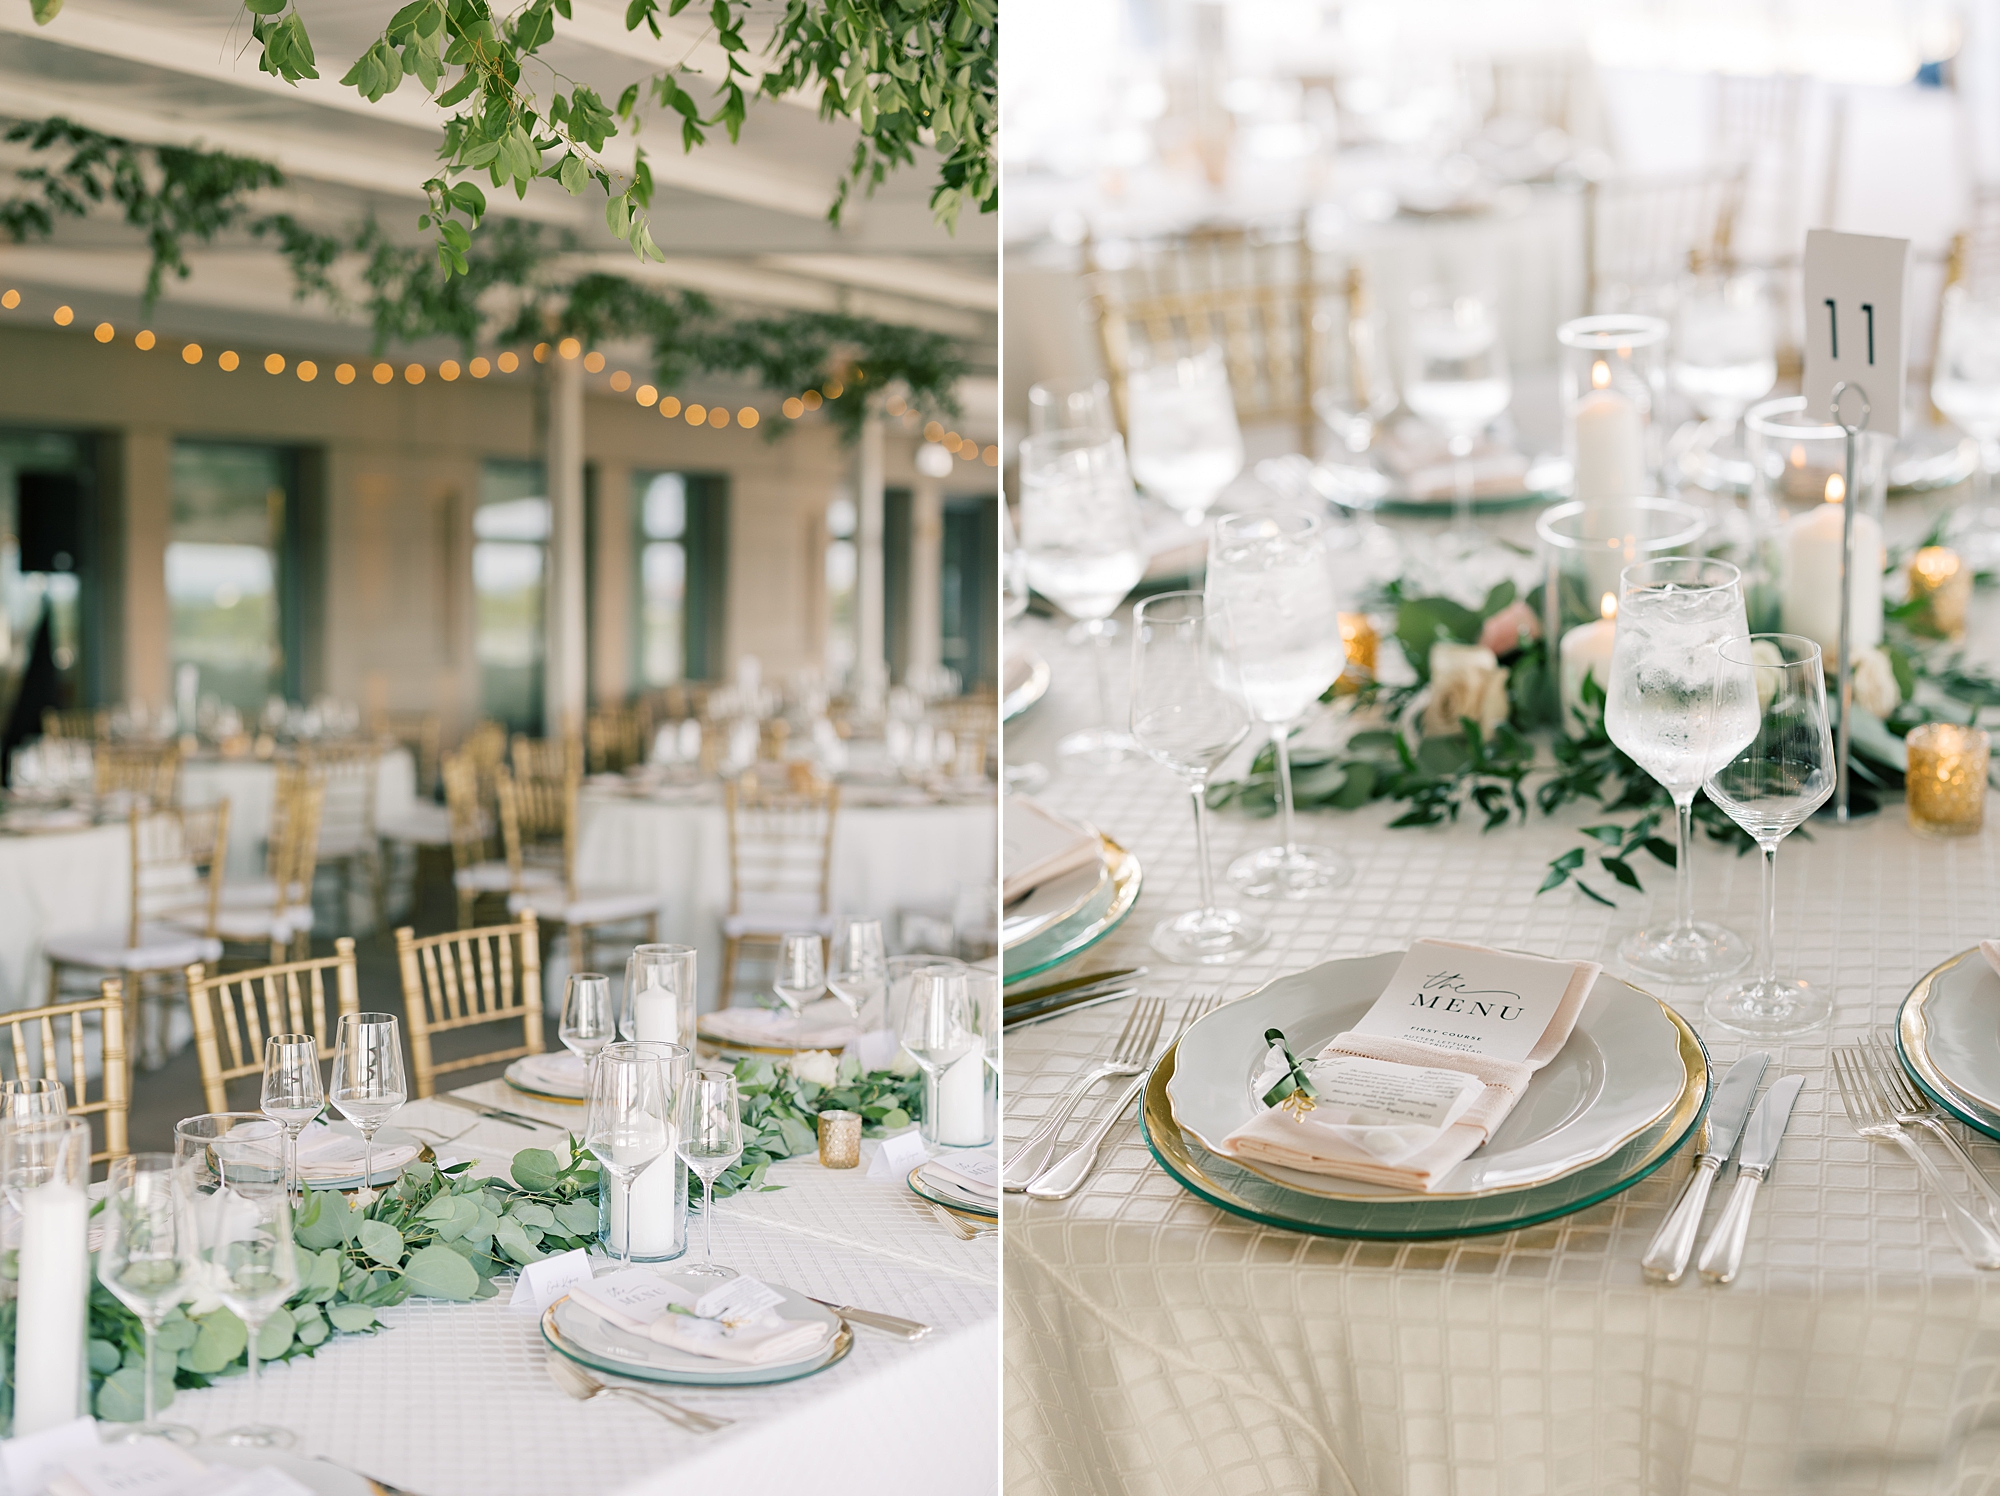 Potomac View Terrace wedding reception with greenery and gold rimmed plates 